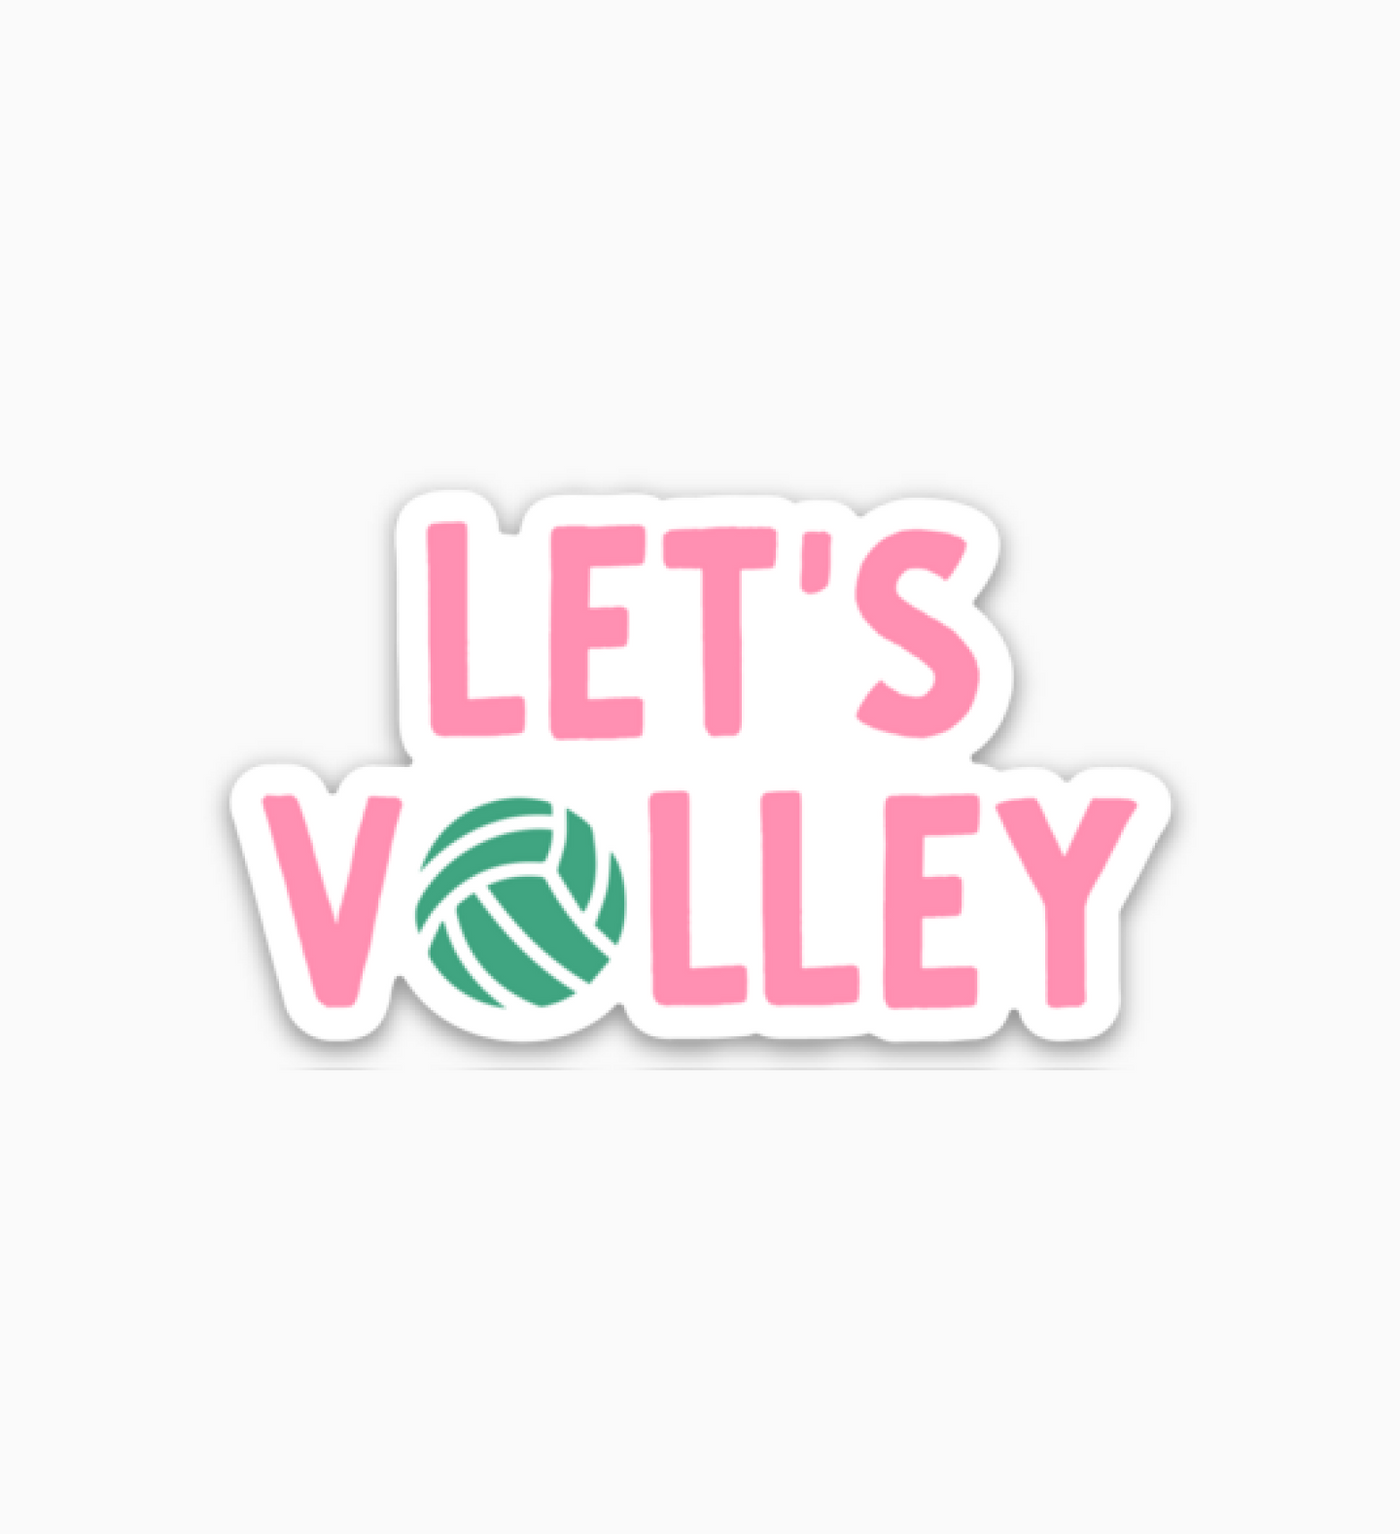 Let's Volley - Volleyball Sticker